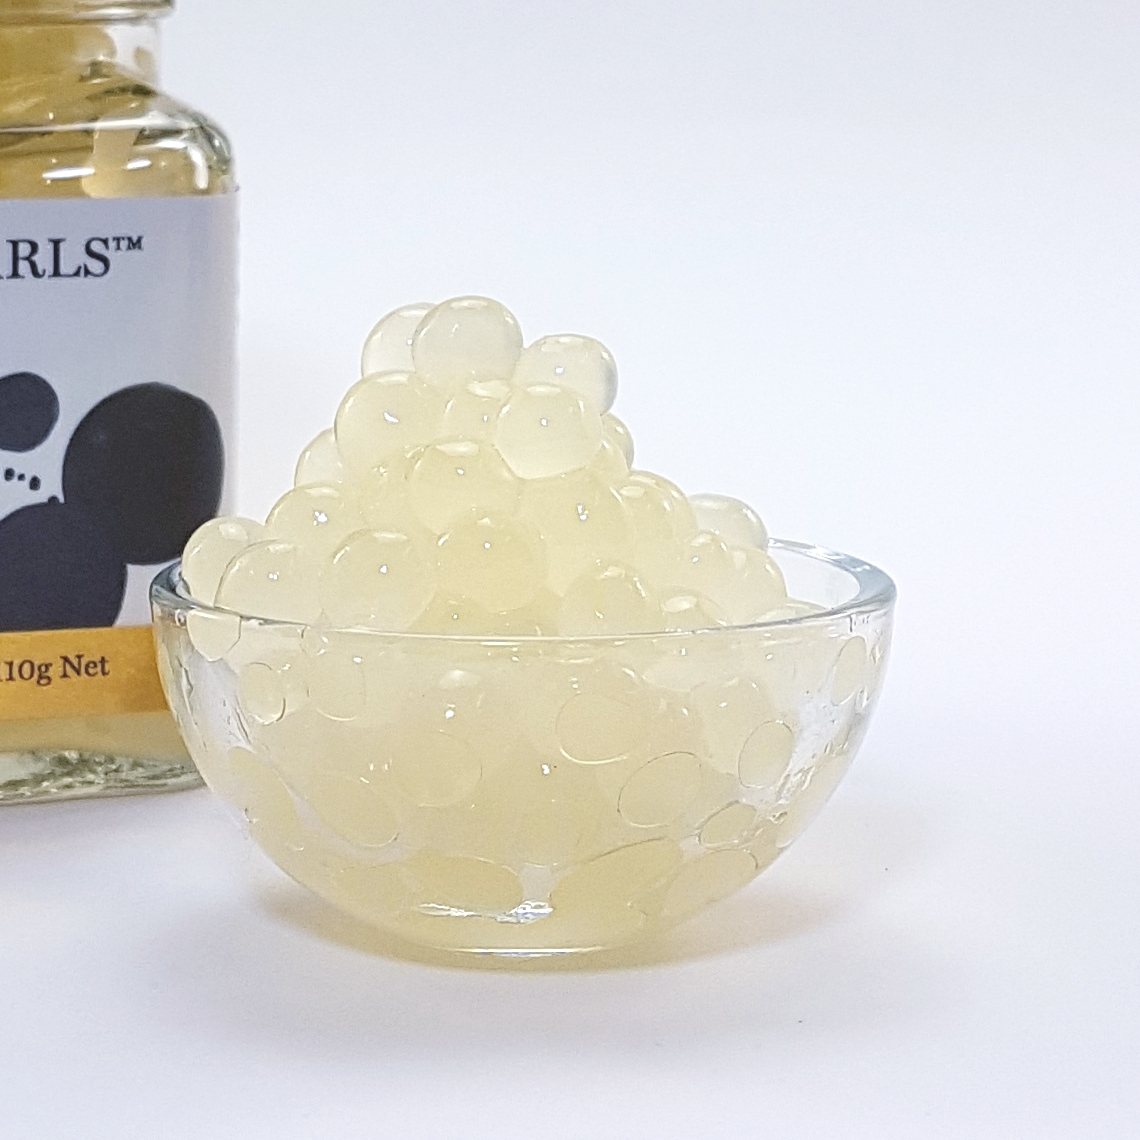 Yuzu Flavour Pearls Product in dish